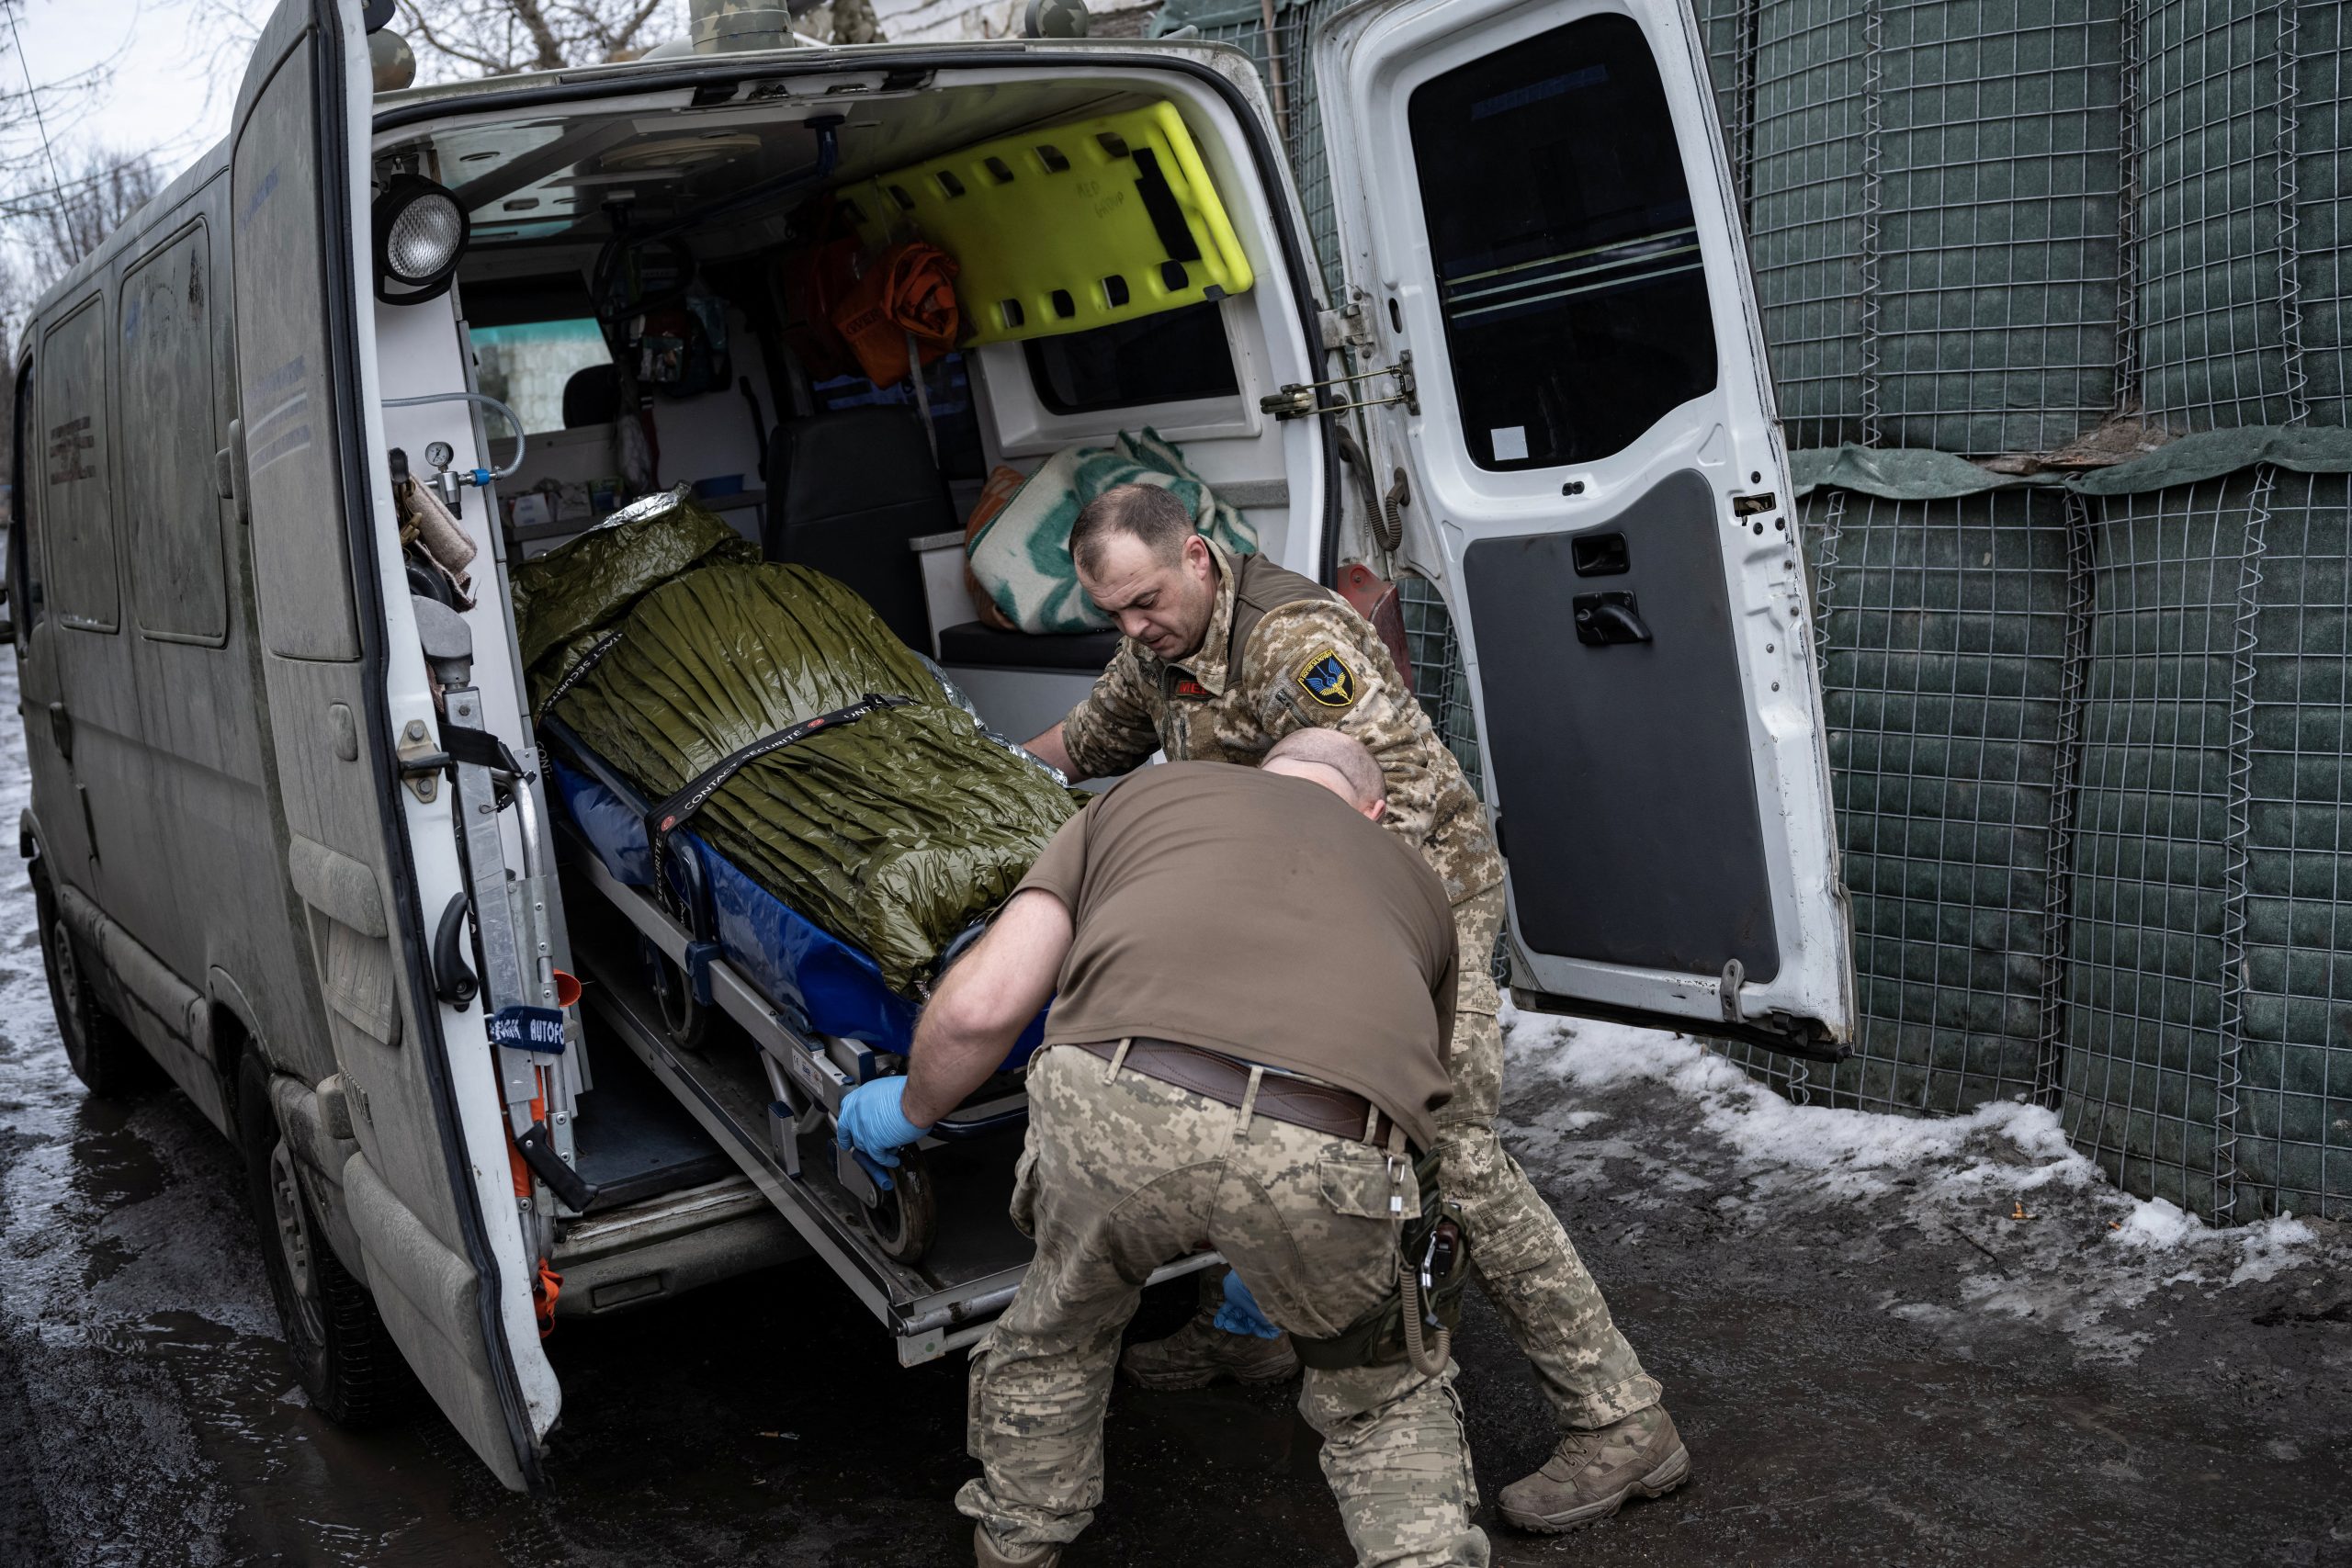 Ukraine’s ‘Second Front line’: Stories of Courage from the Medics in the Trenches